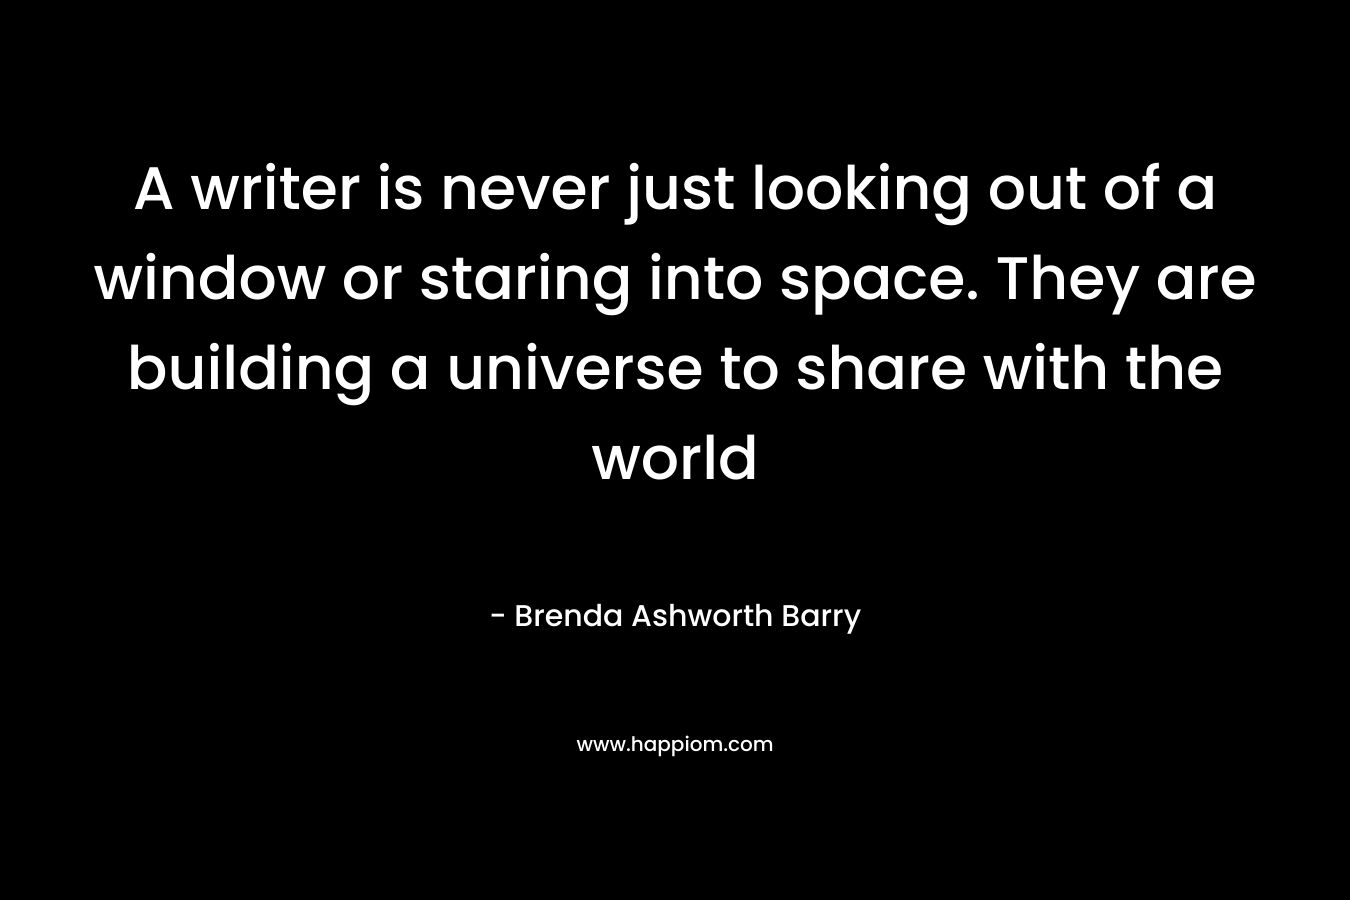 A writer is never just looking out of a window or staring into space. They are building a universe to share with the world